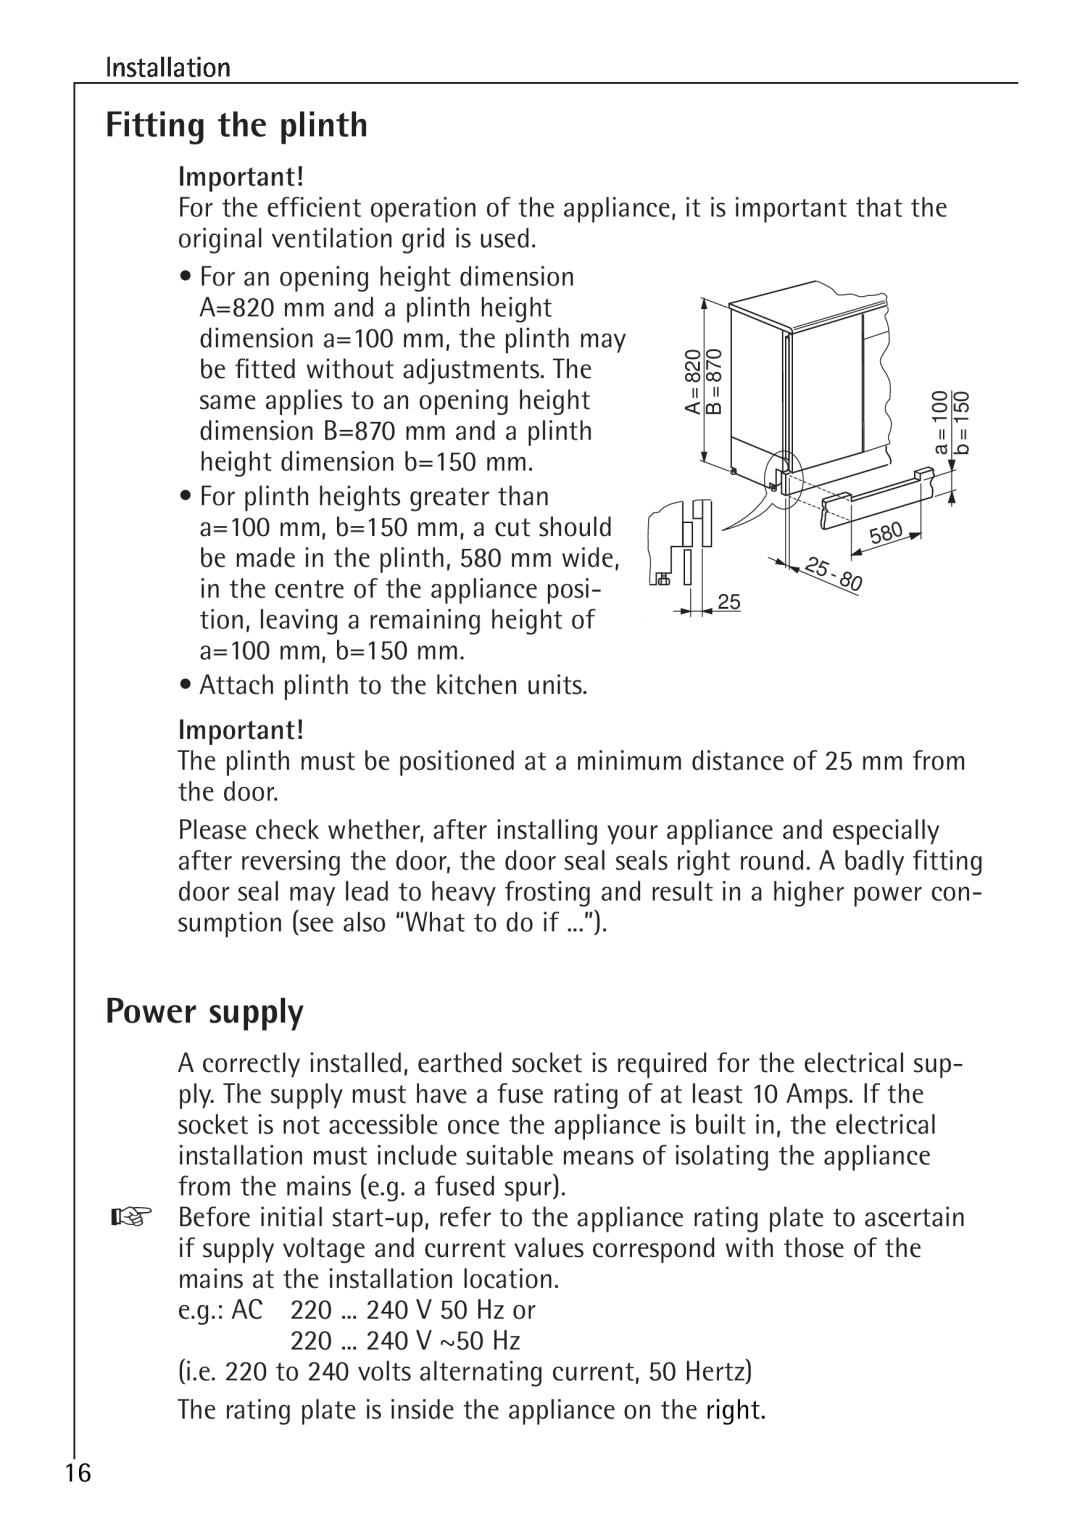 Electrolux 86000 i installation instructions Fitting the plinth, Power supply 